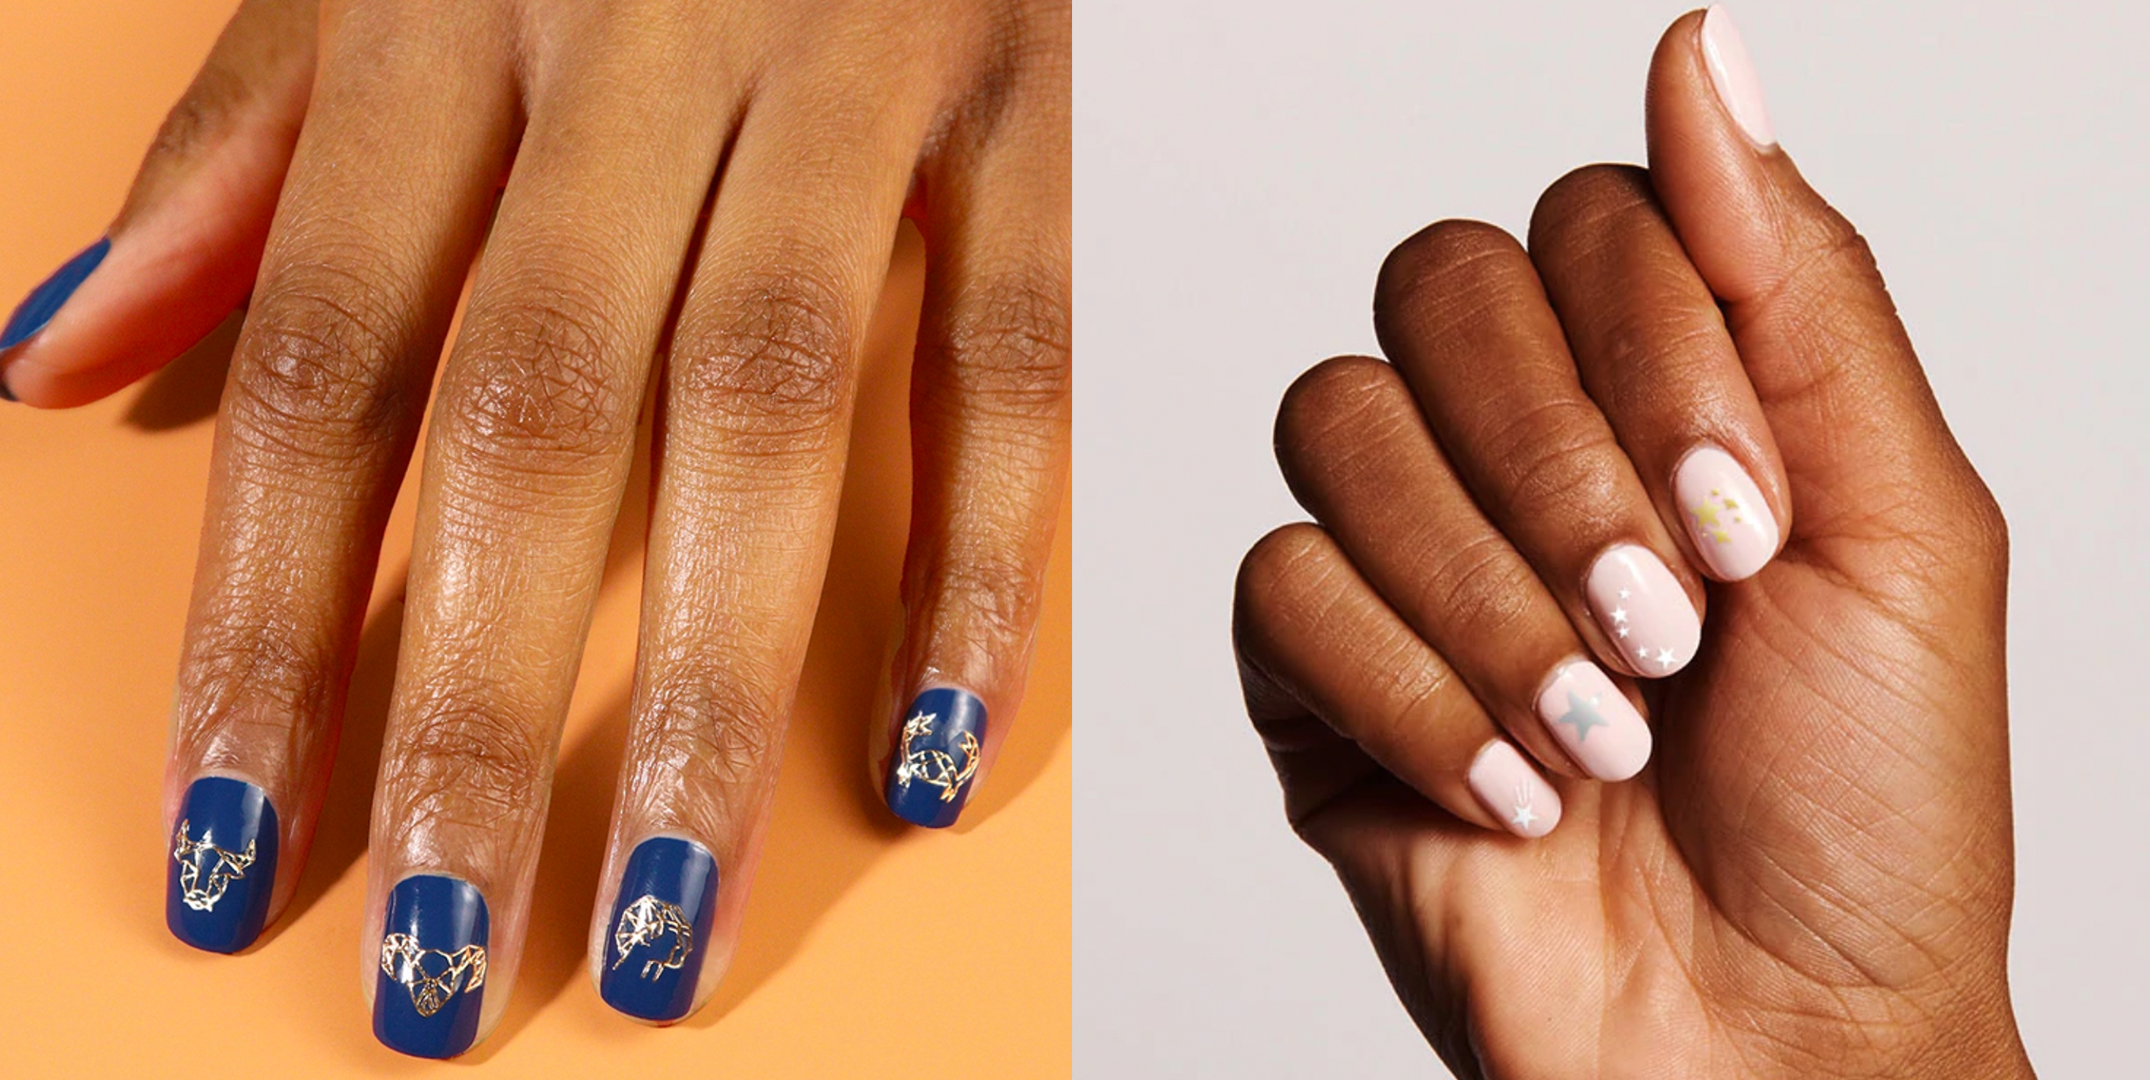 27 Terrific Designs Done With Gel Nail Polish To Try This Season